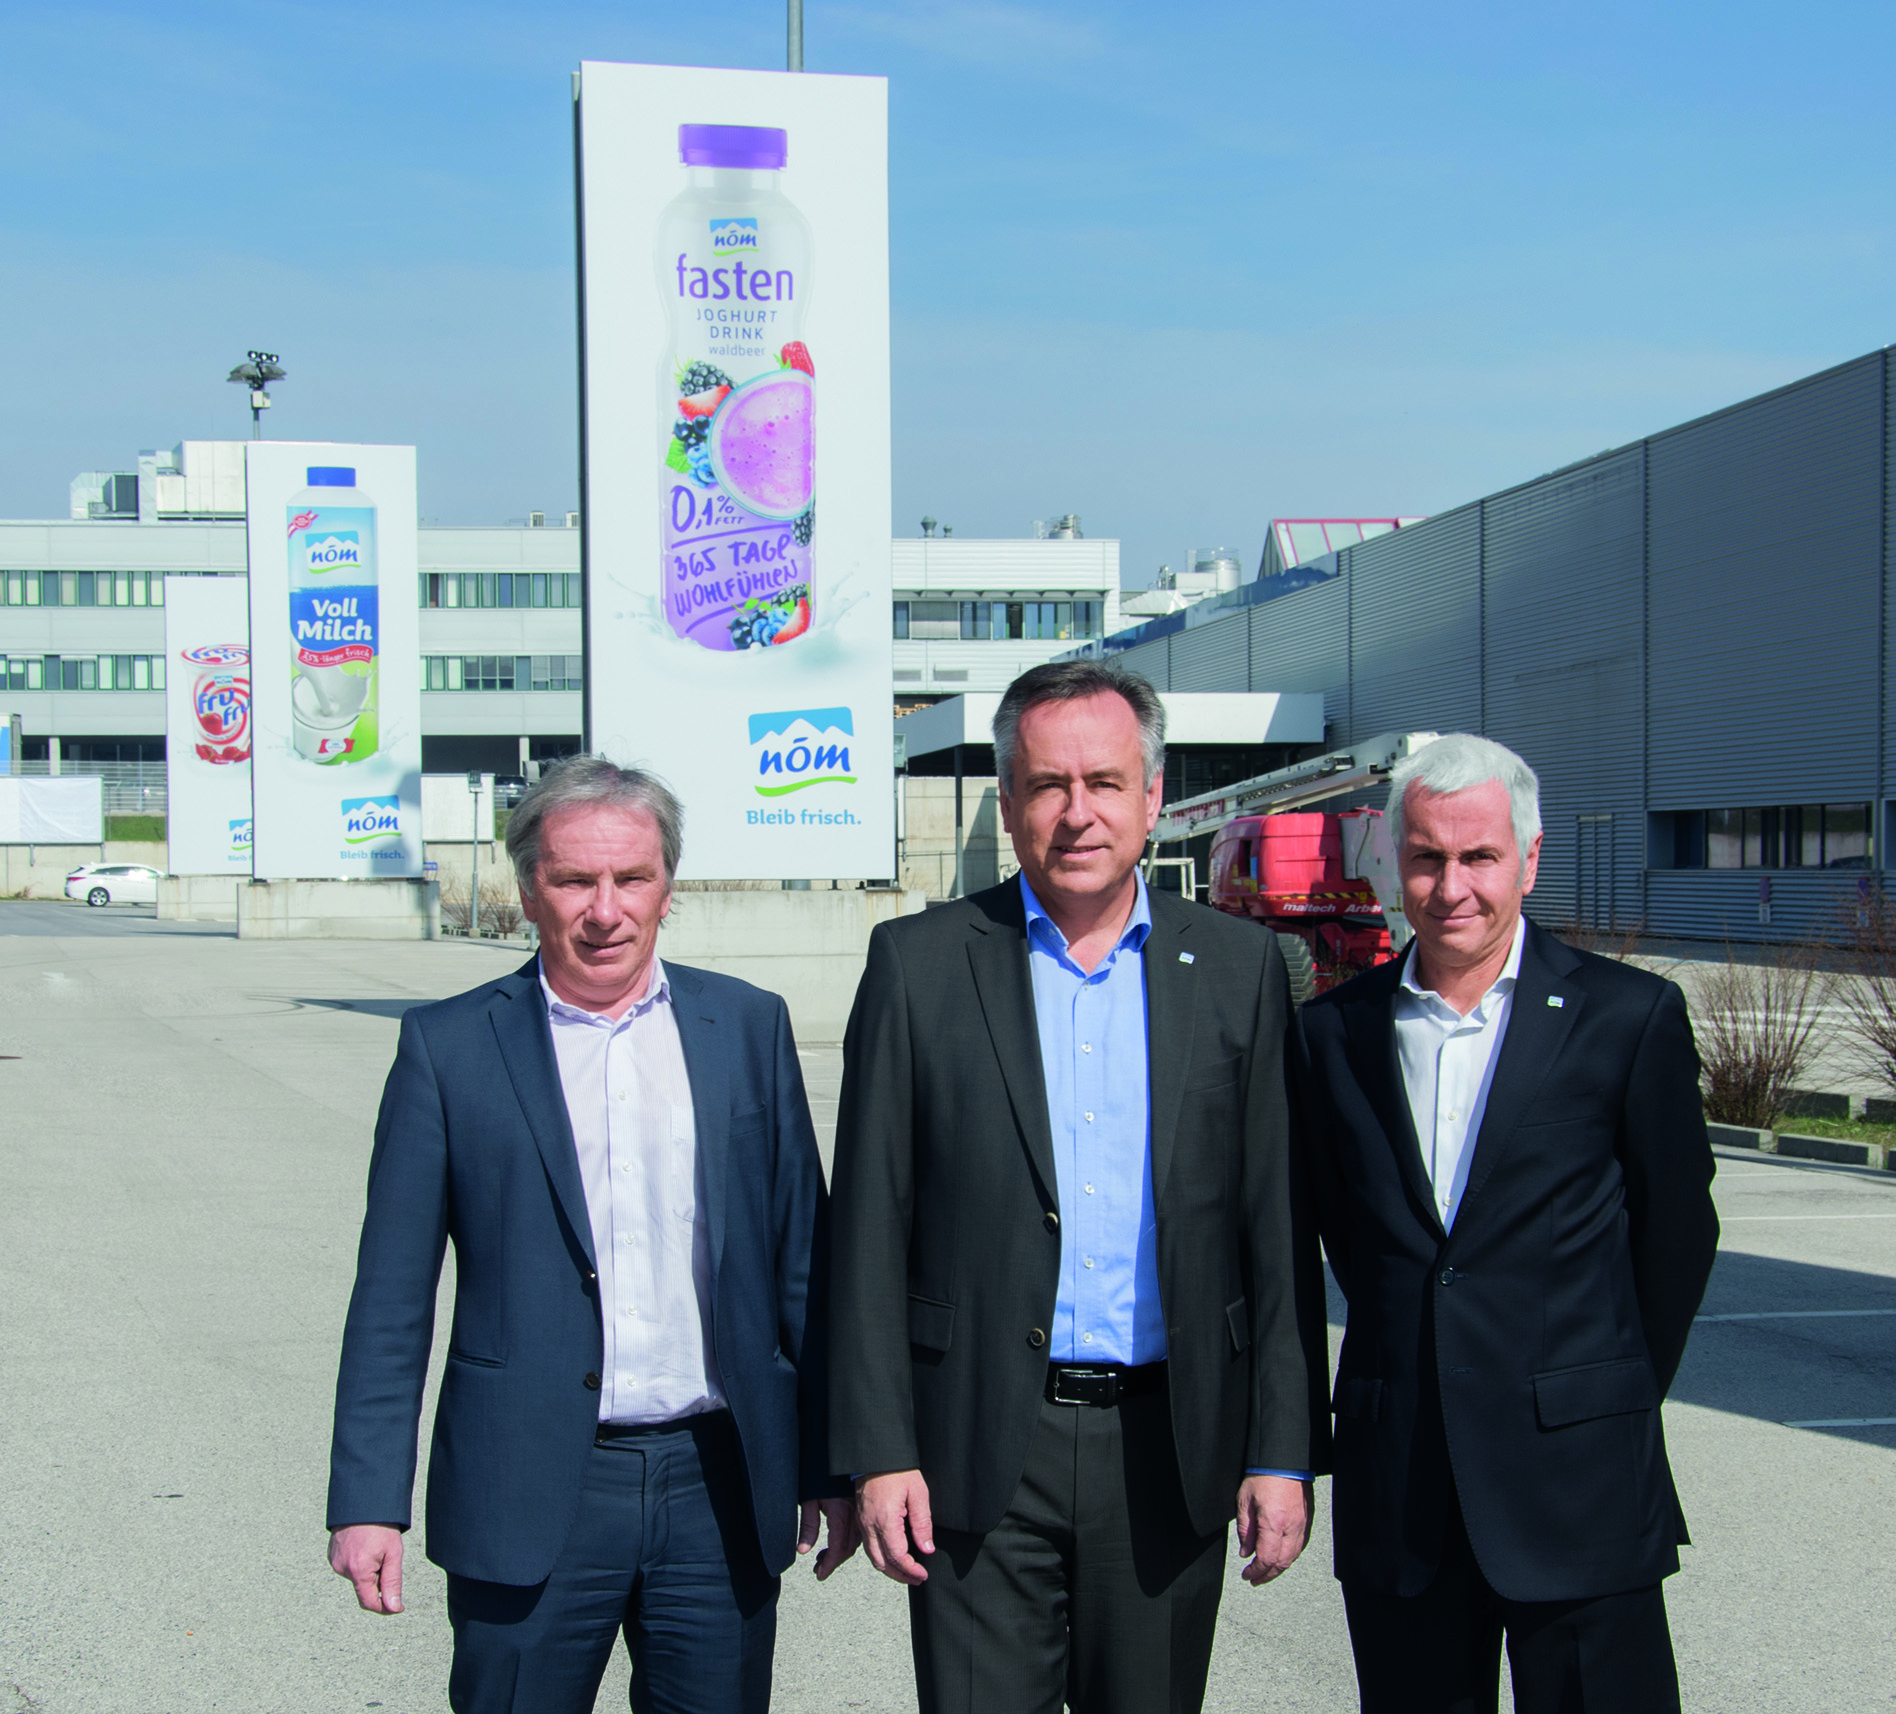 Frischlogistik GmbH implementing new warehouse system in Baden